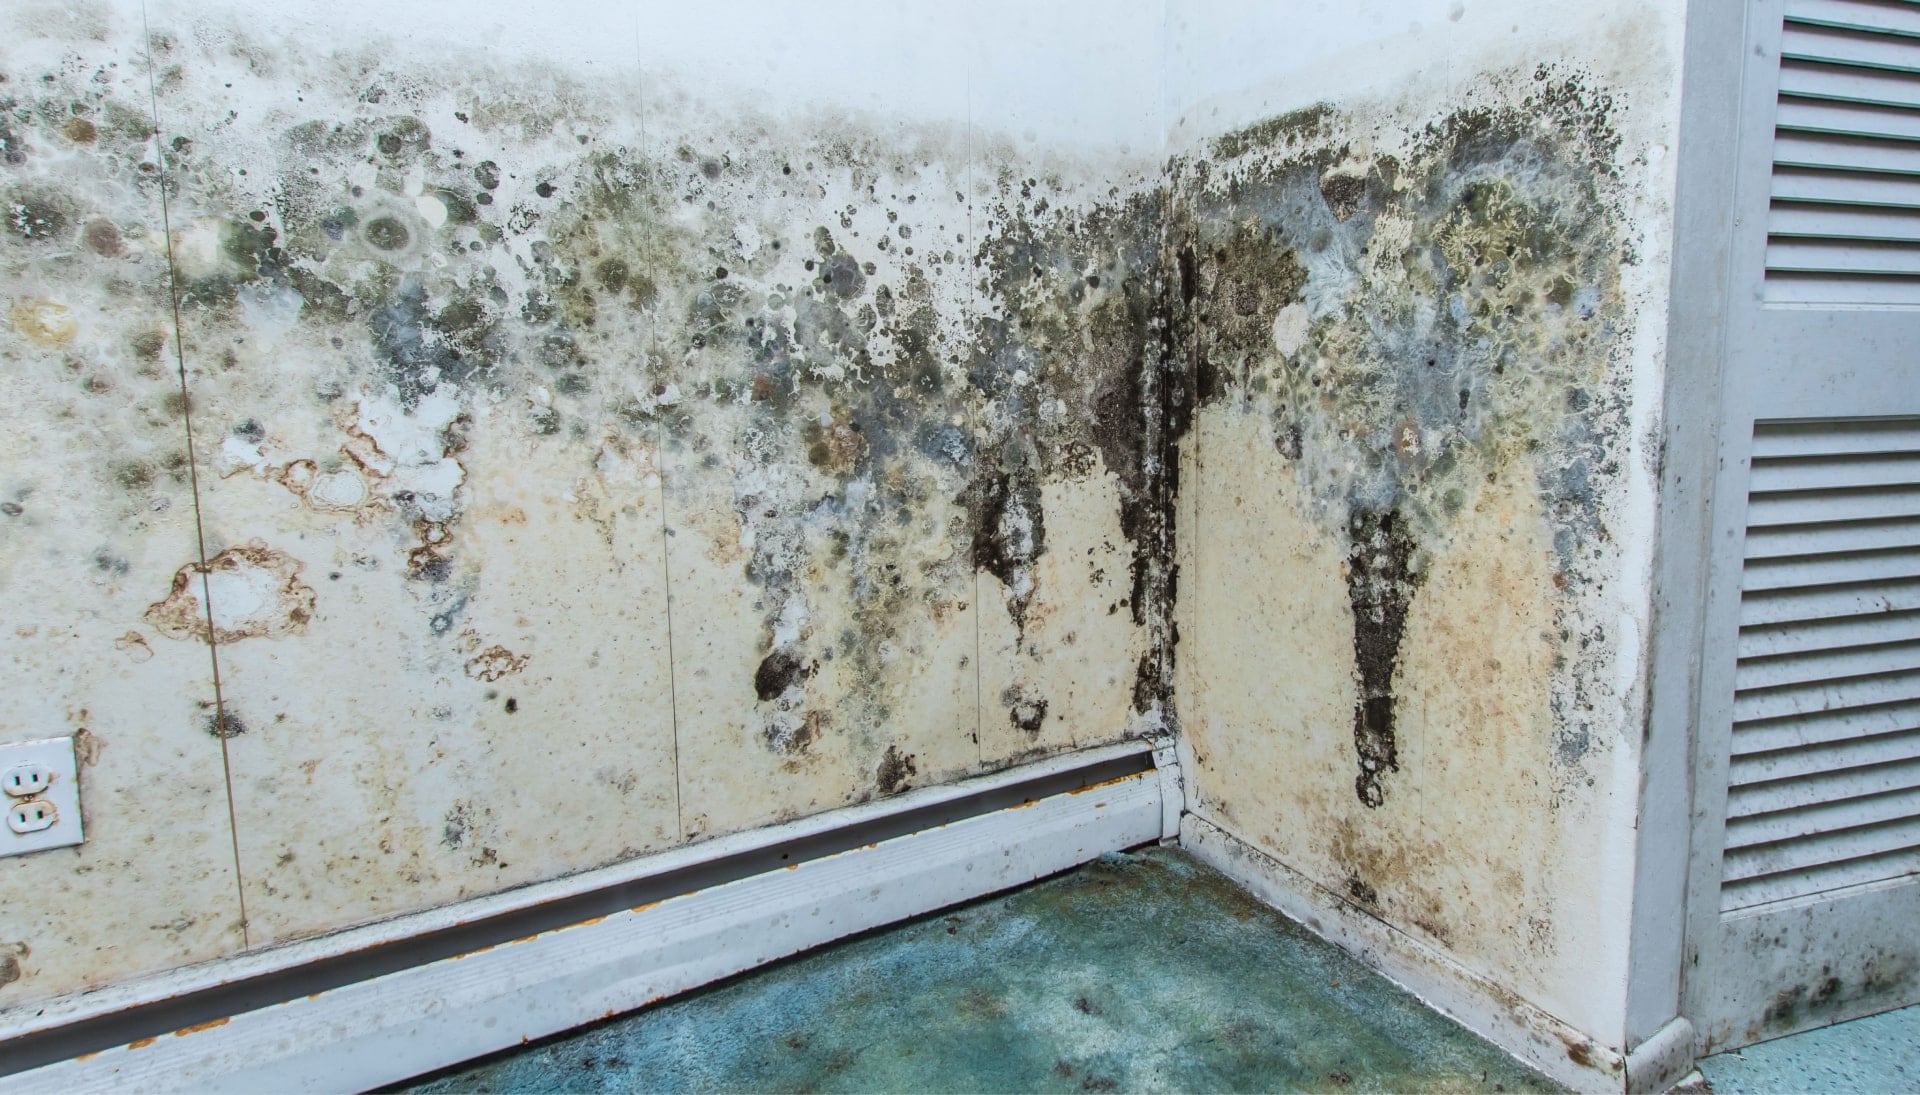 A mold remediation team using specialized techniques to remove mold damage and control odors in a Miami Gardens property, with a focus on safety and efficiency